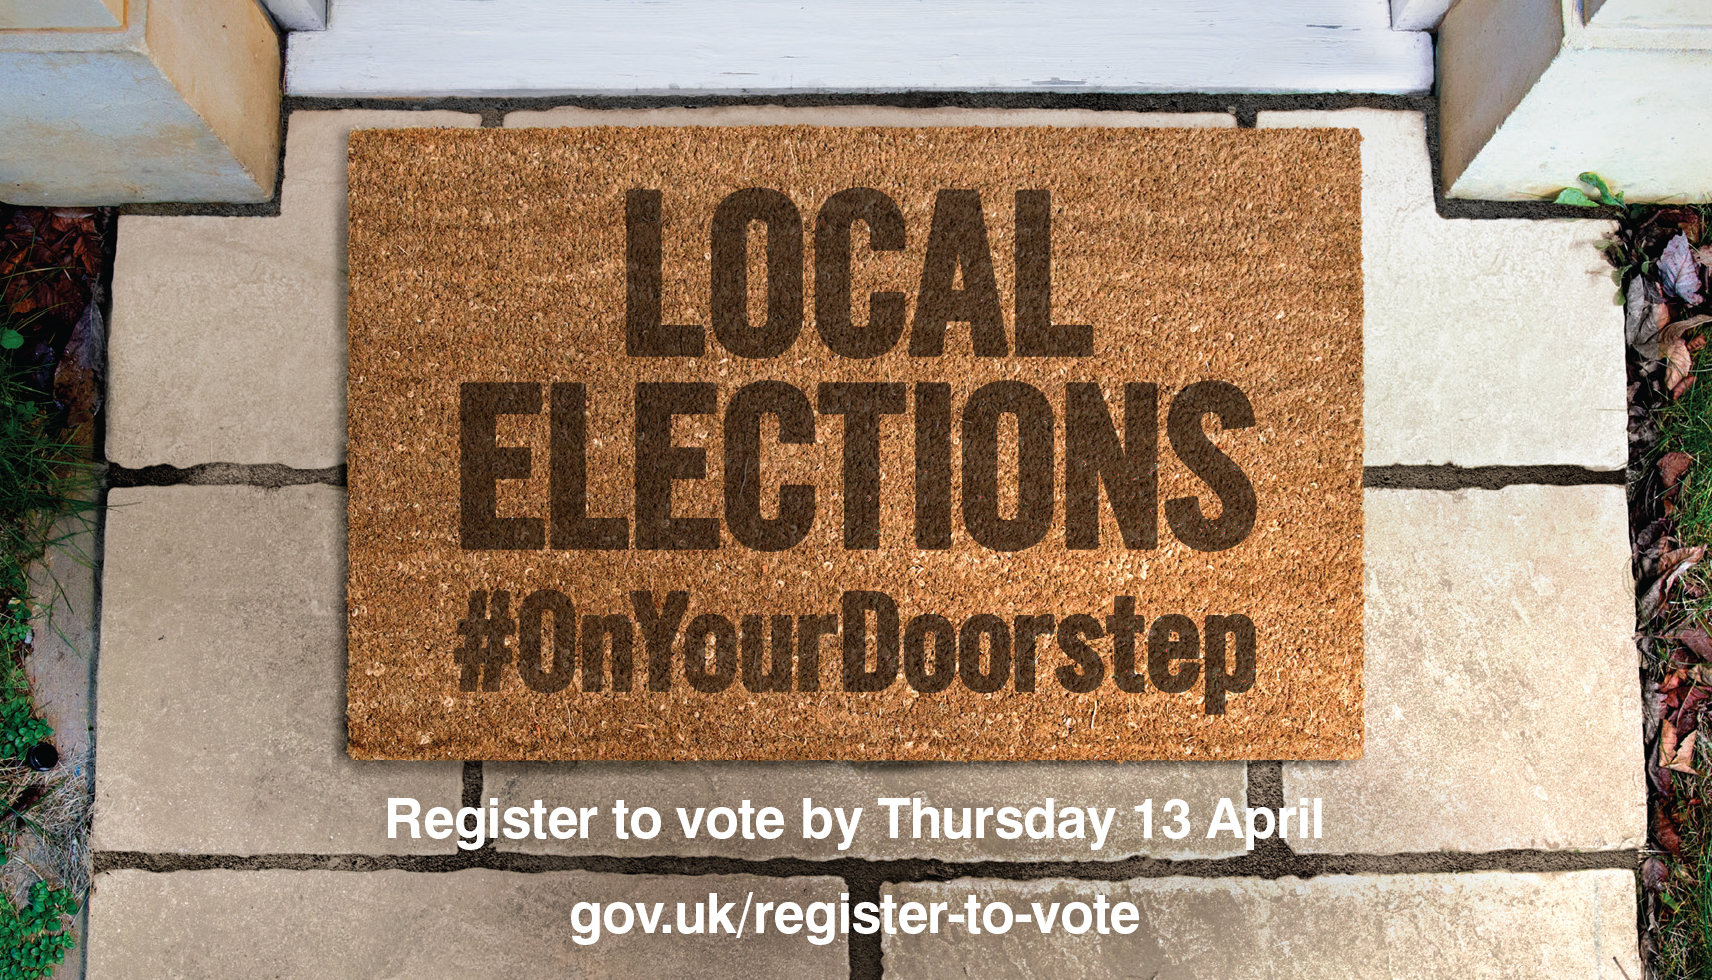 Make sure you’re on the electoral register